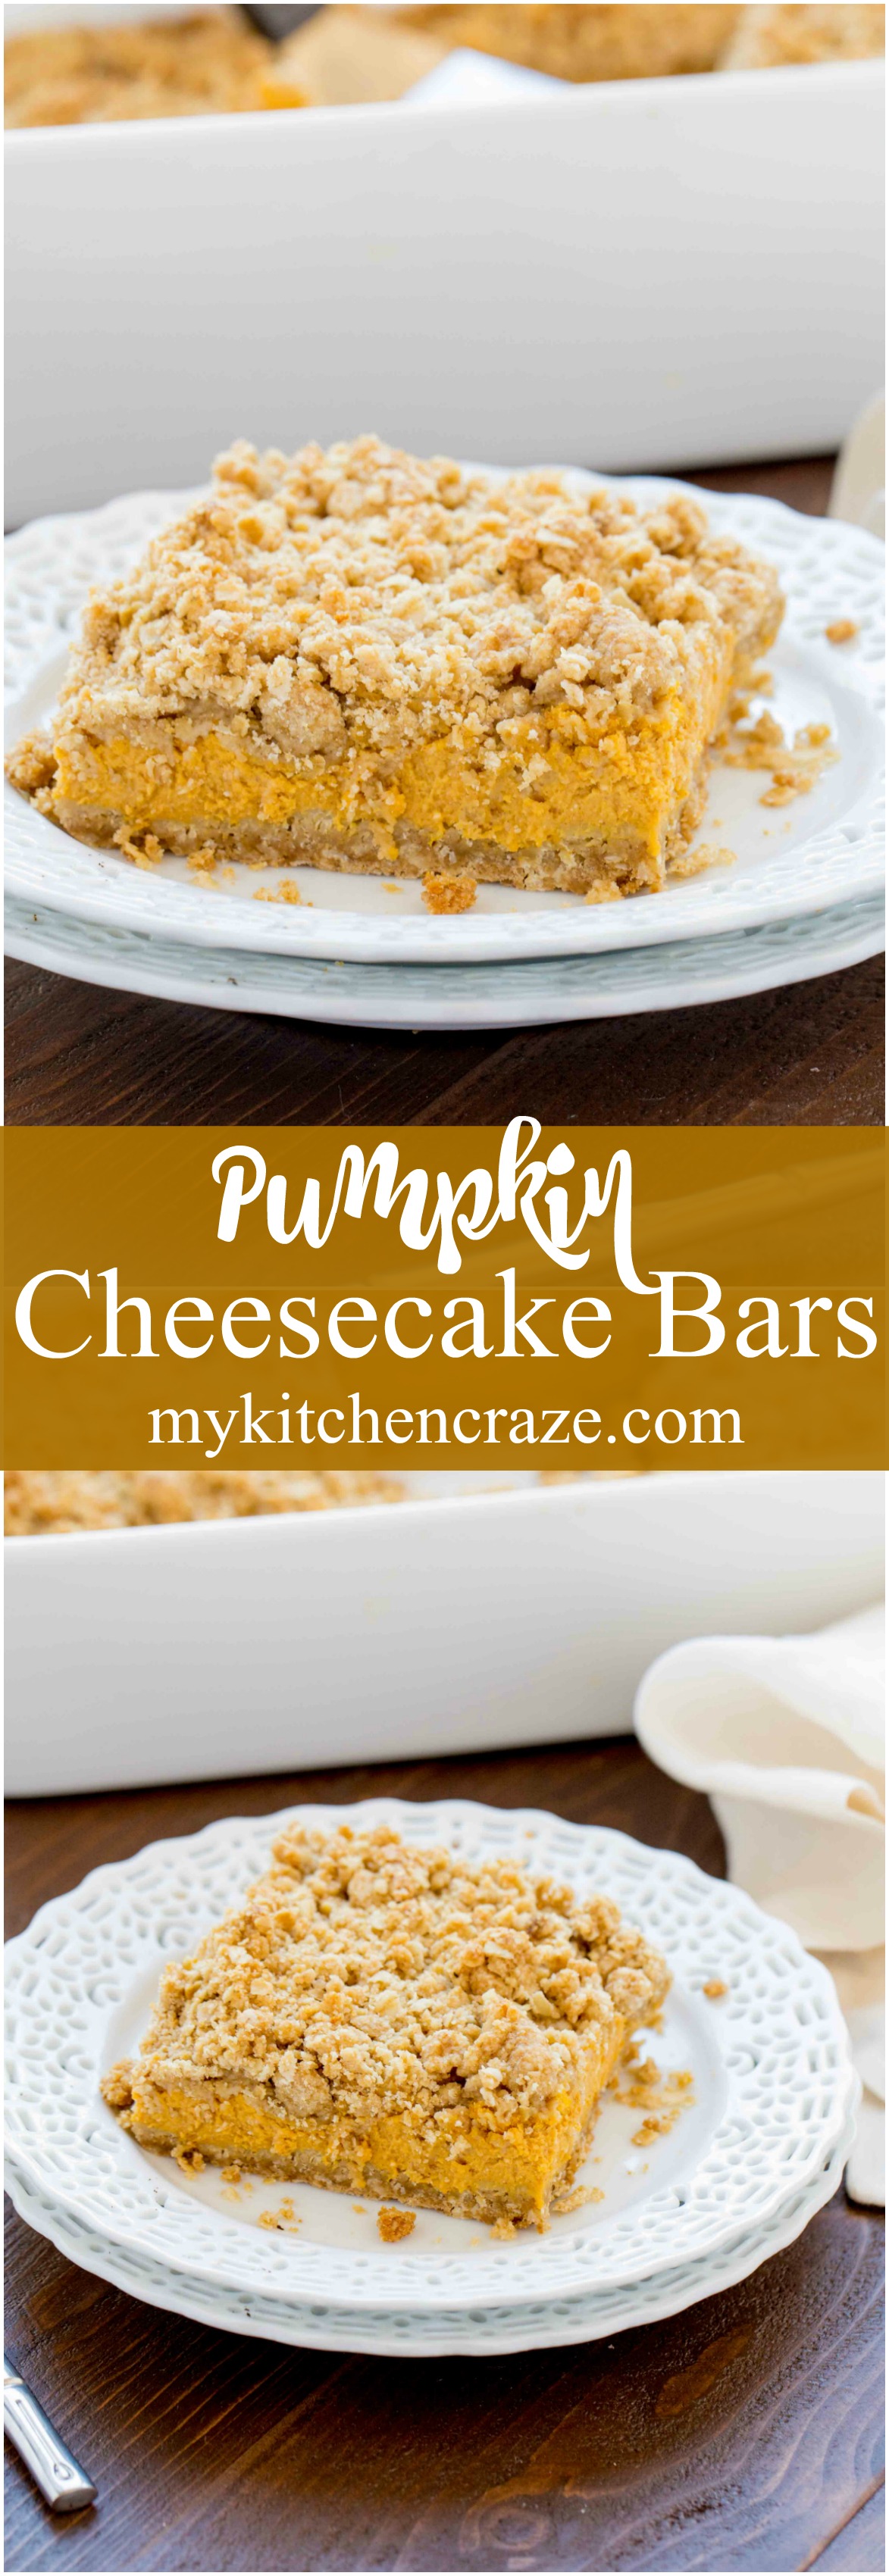 Pumpkin Cheesecake Bars ~ When you combine pumpkin & cheesecake together, what do you get? Delicious PUMPKIN CHEESECAKE BARS! These bars are creamy with a crunchy topping and crust. Yum!